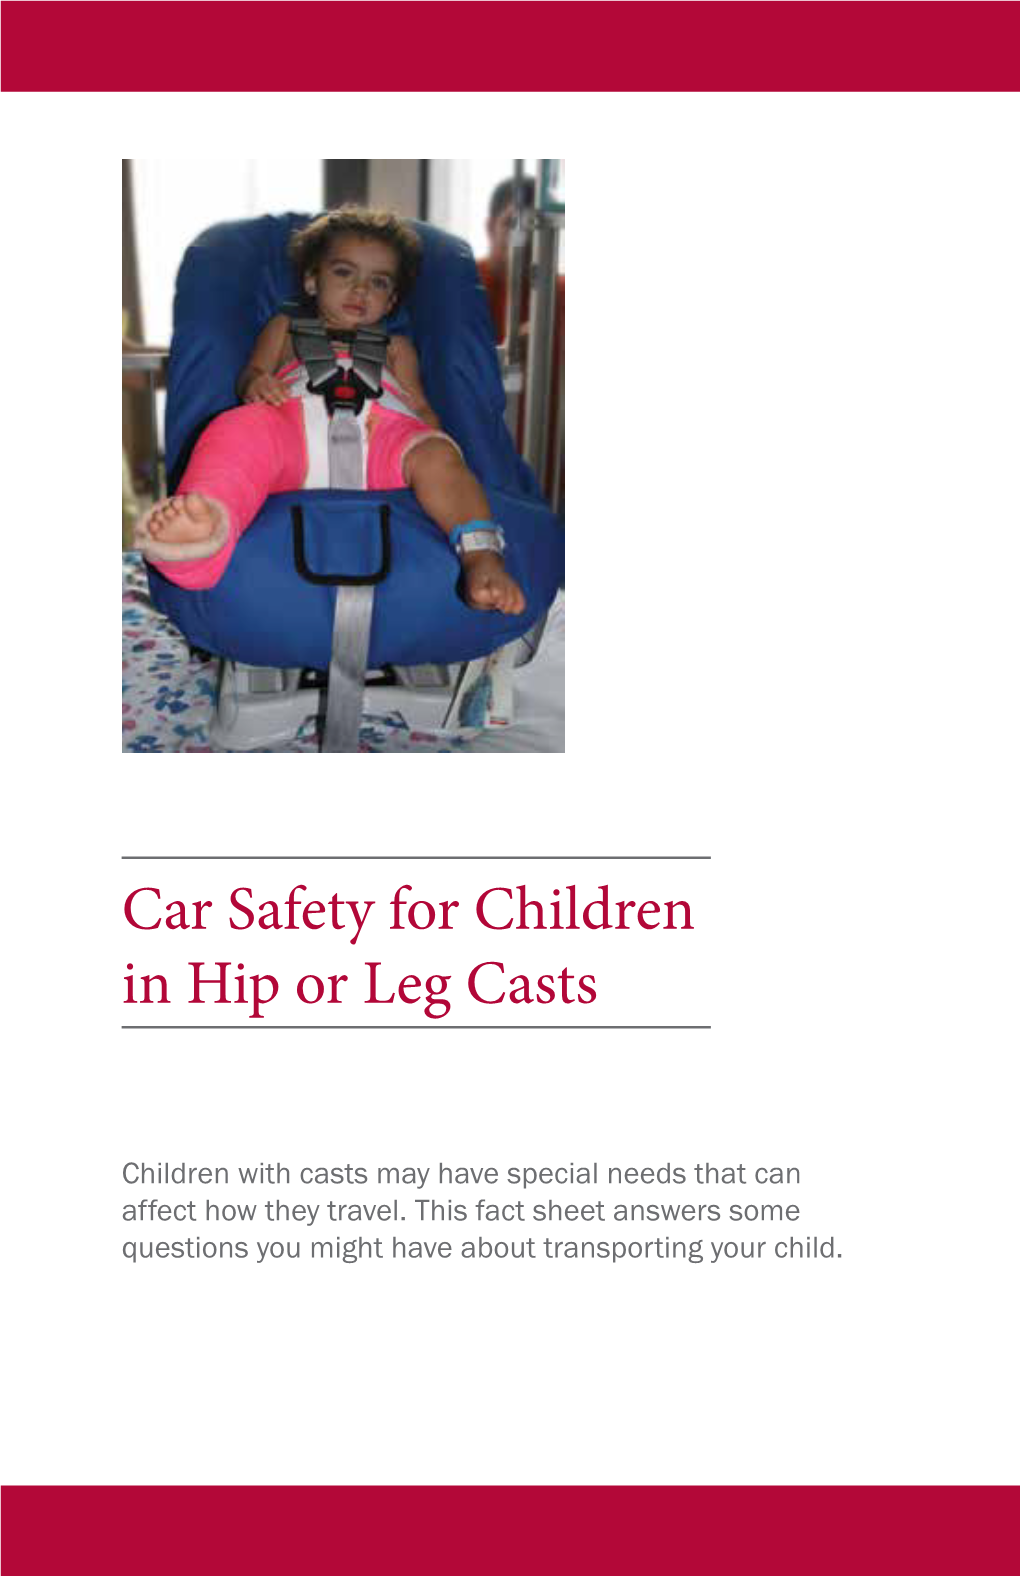 Car Safety for Children in Hip Or Leg Casts